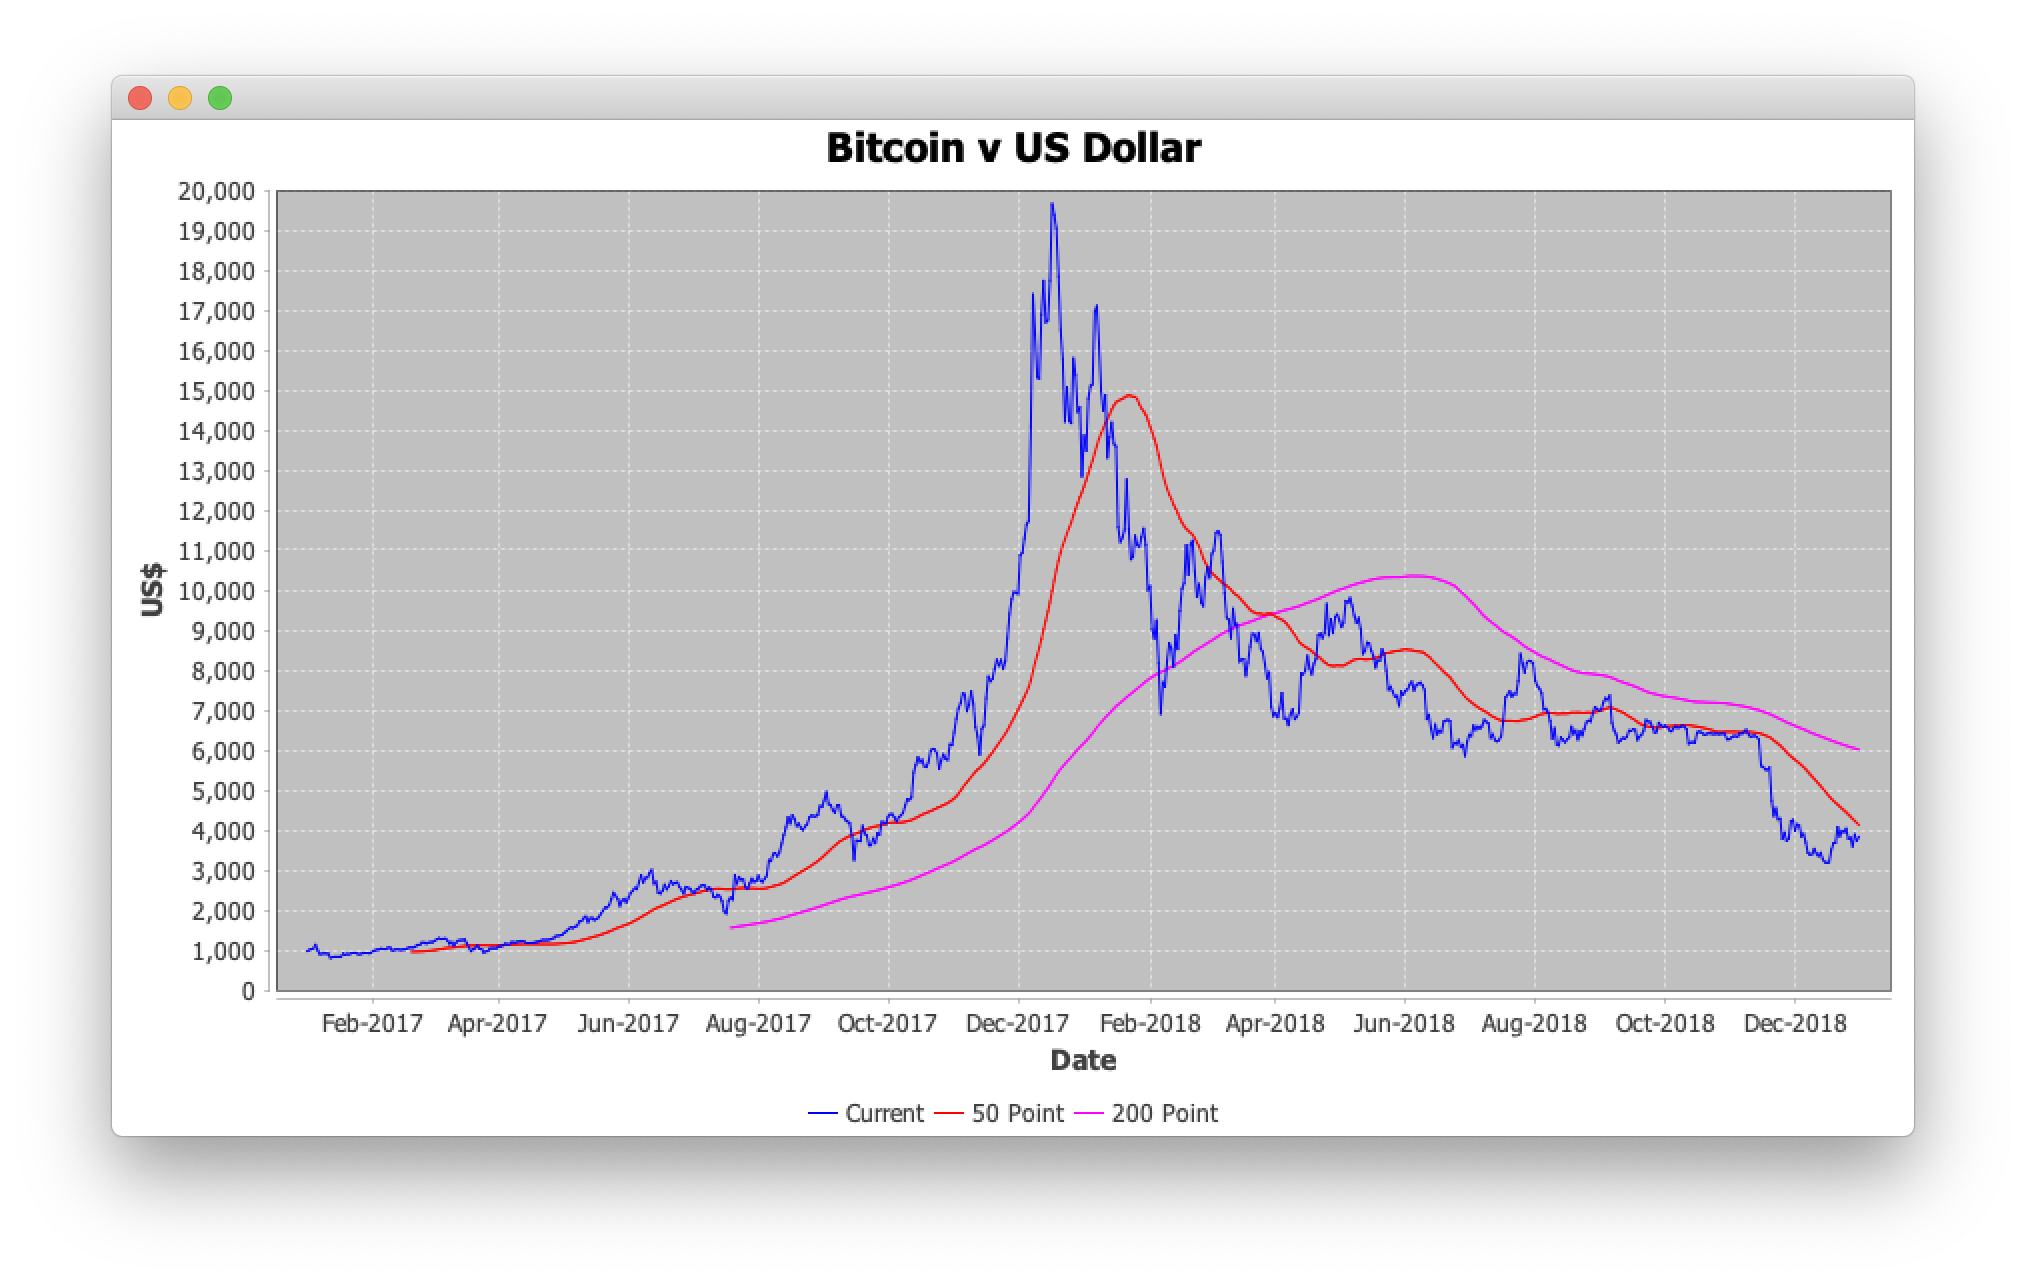 Image of Bitcoin prices in 2017 and 2018